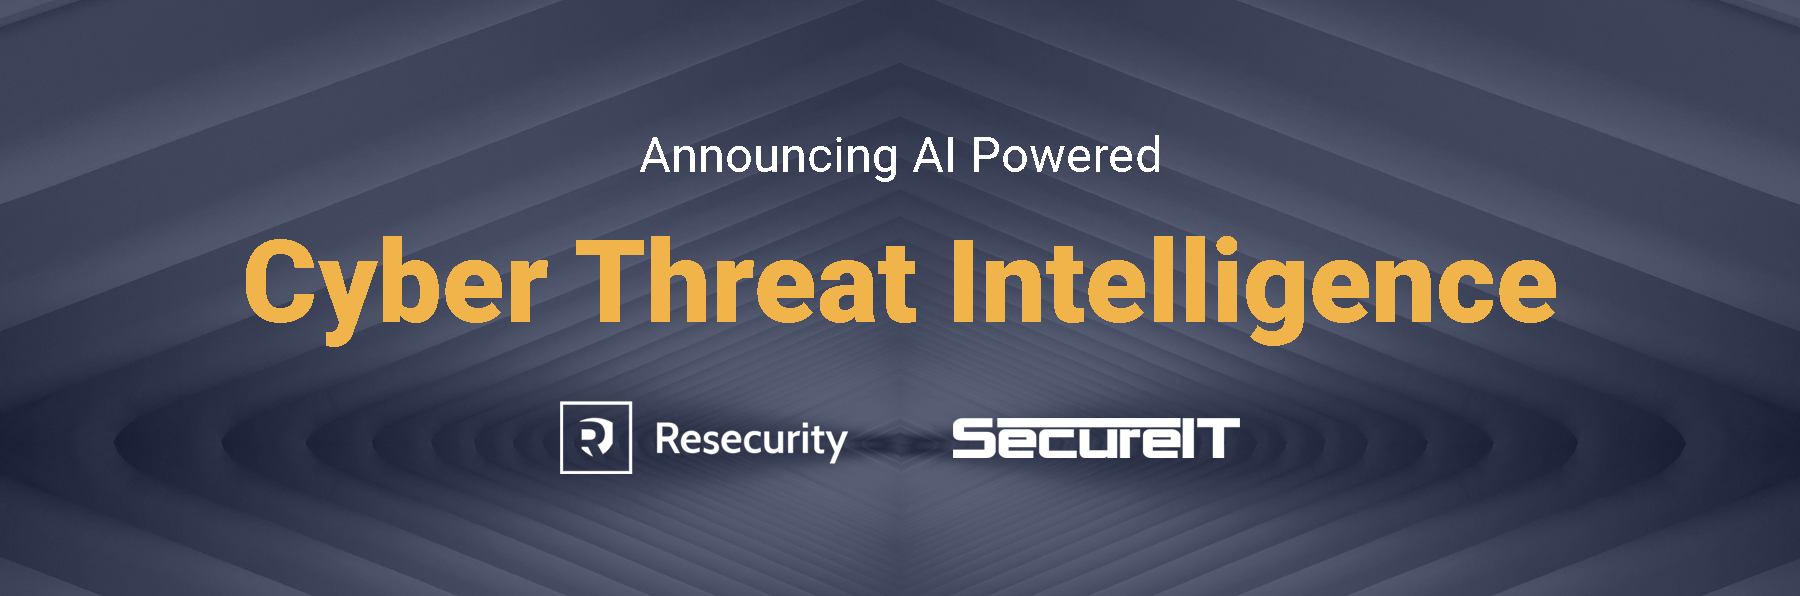 Image banner - Announcing AI Powered Cyber Threat Intelligence